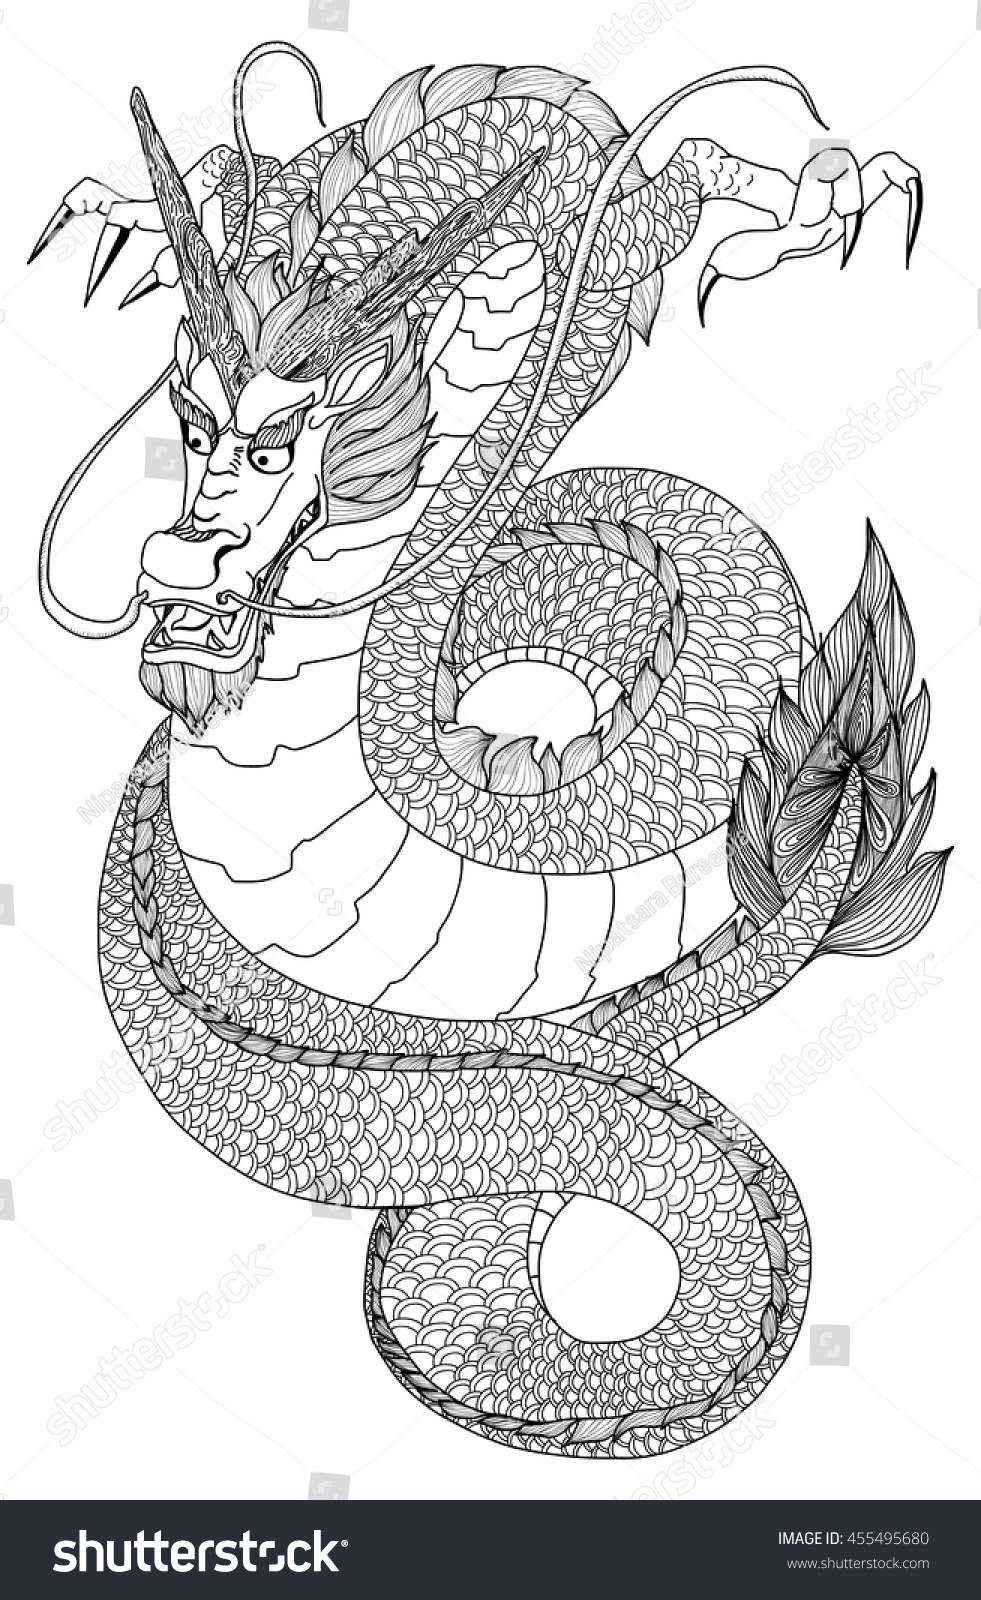 Download Hand Drawn Zentangle And Doodle Style Dragon Stock Vector ...